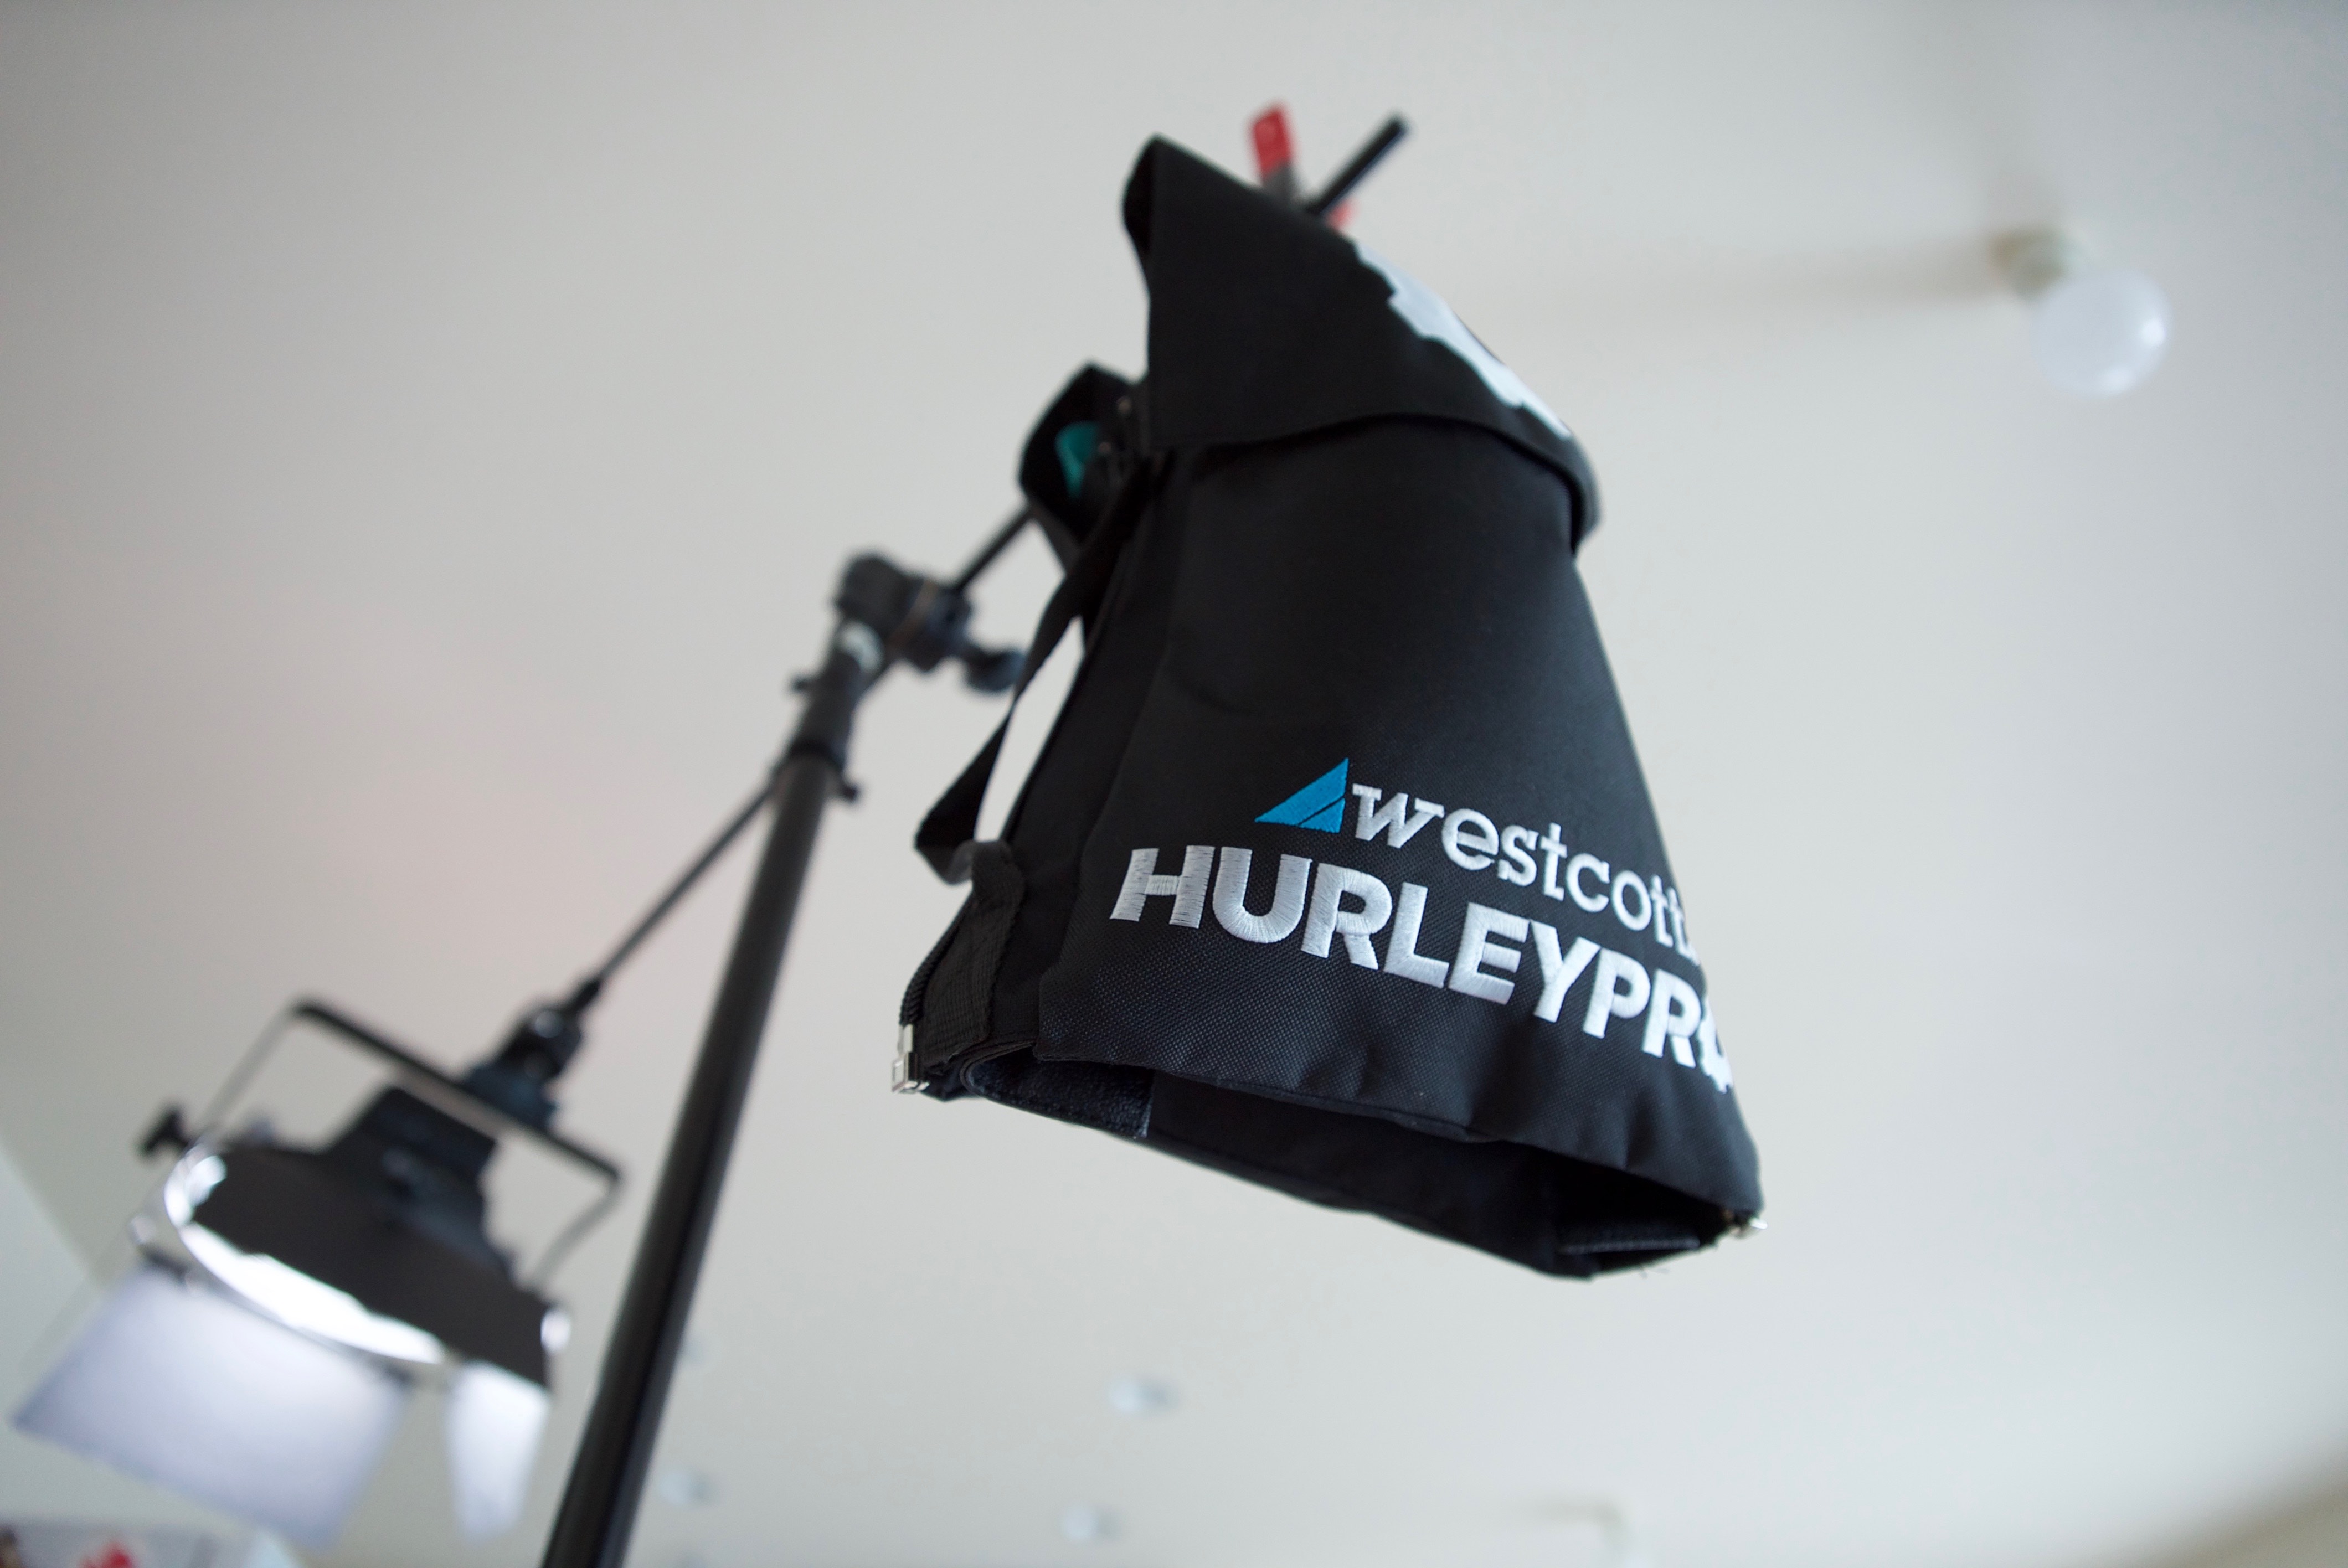 Westcott HurleyPro H2Pro Water Weight Bag 